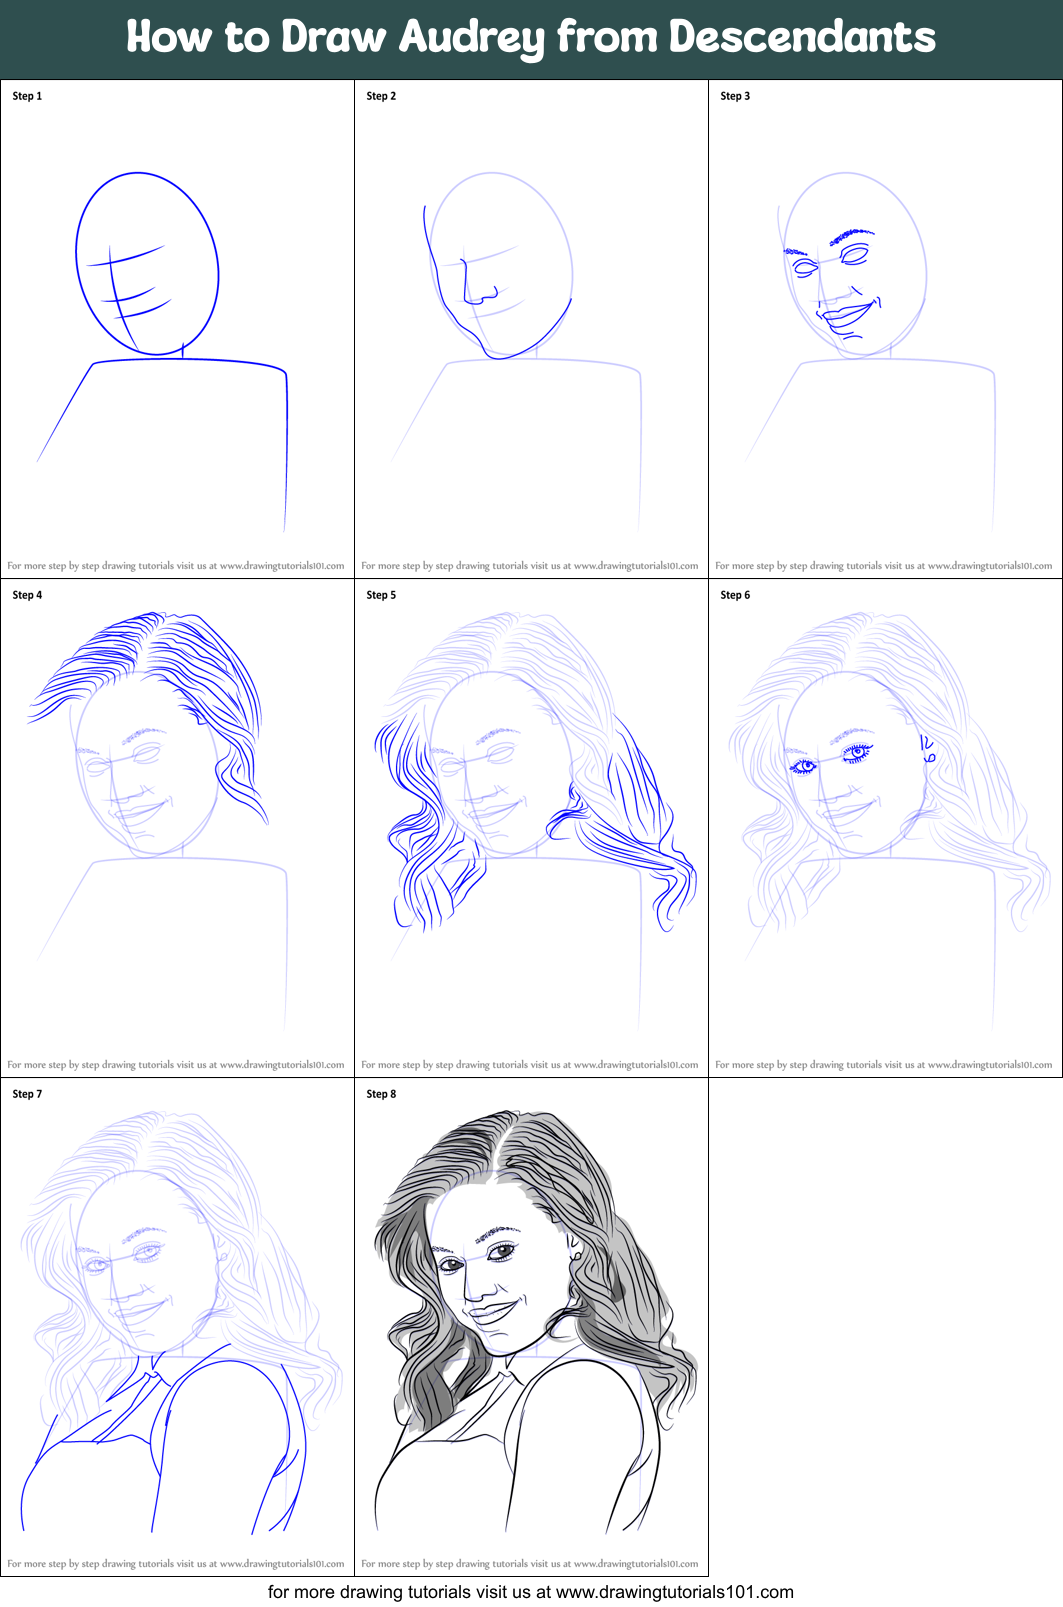 how to draw audrey from descendants printable step by step drawing sheet drawingtutorials101 com